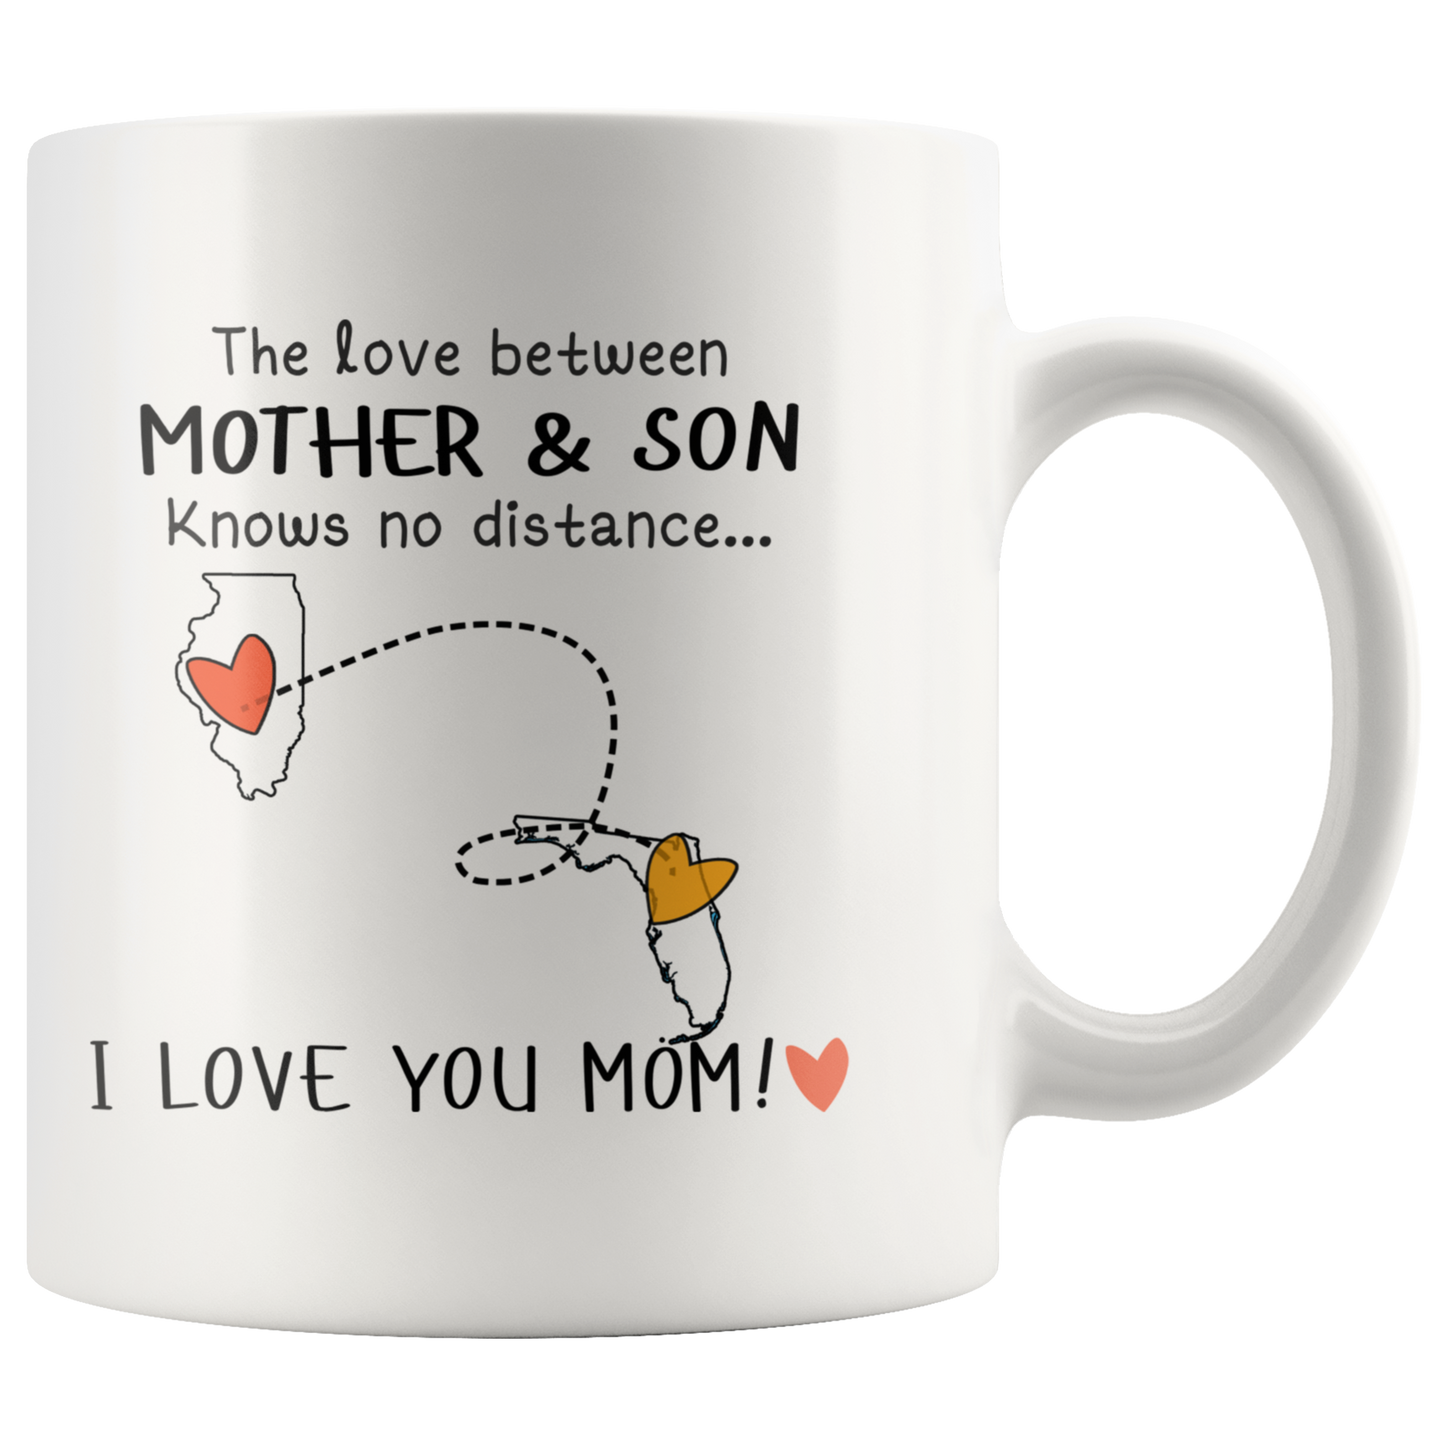 MUG01221340349-sp-23172 - The Love Between Mother And Son Knows No Distance, I Love Yo